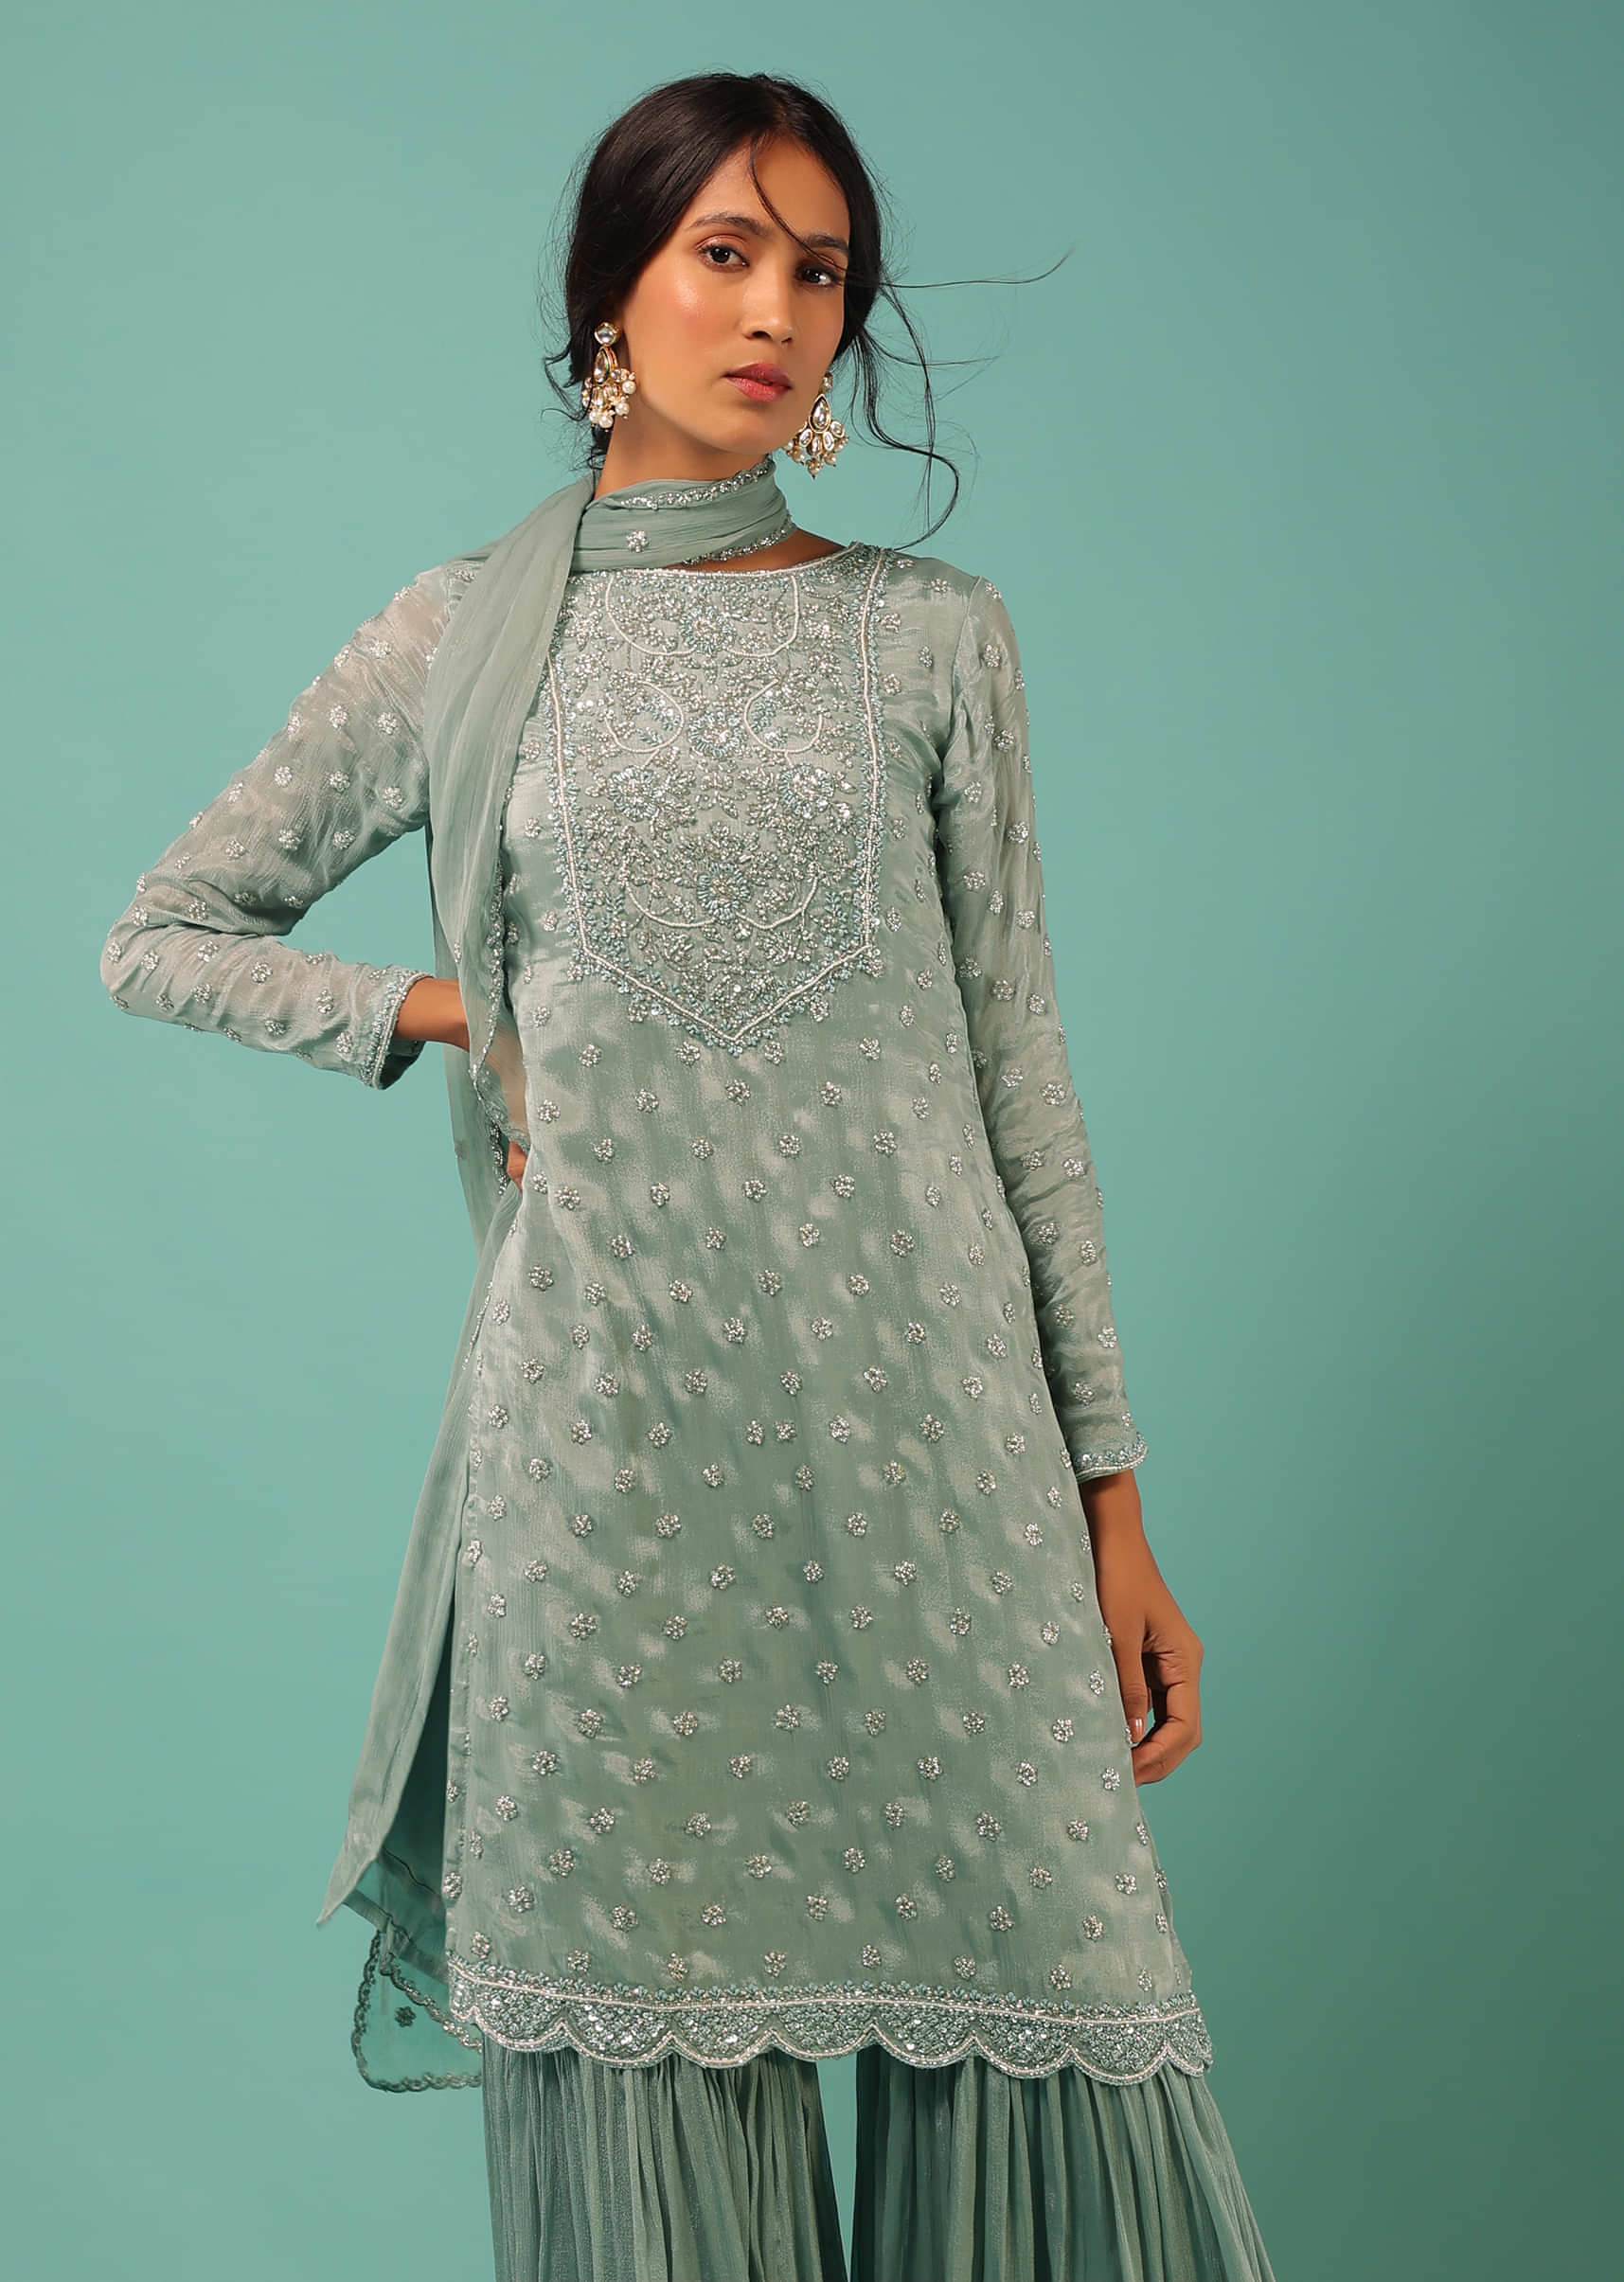 Mint Blue Sharara Suit In Chiffon With Embroidered Floral Yoke And Butti Design